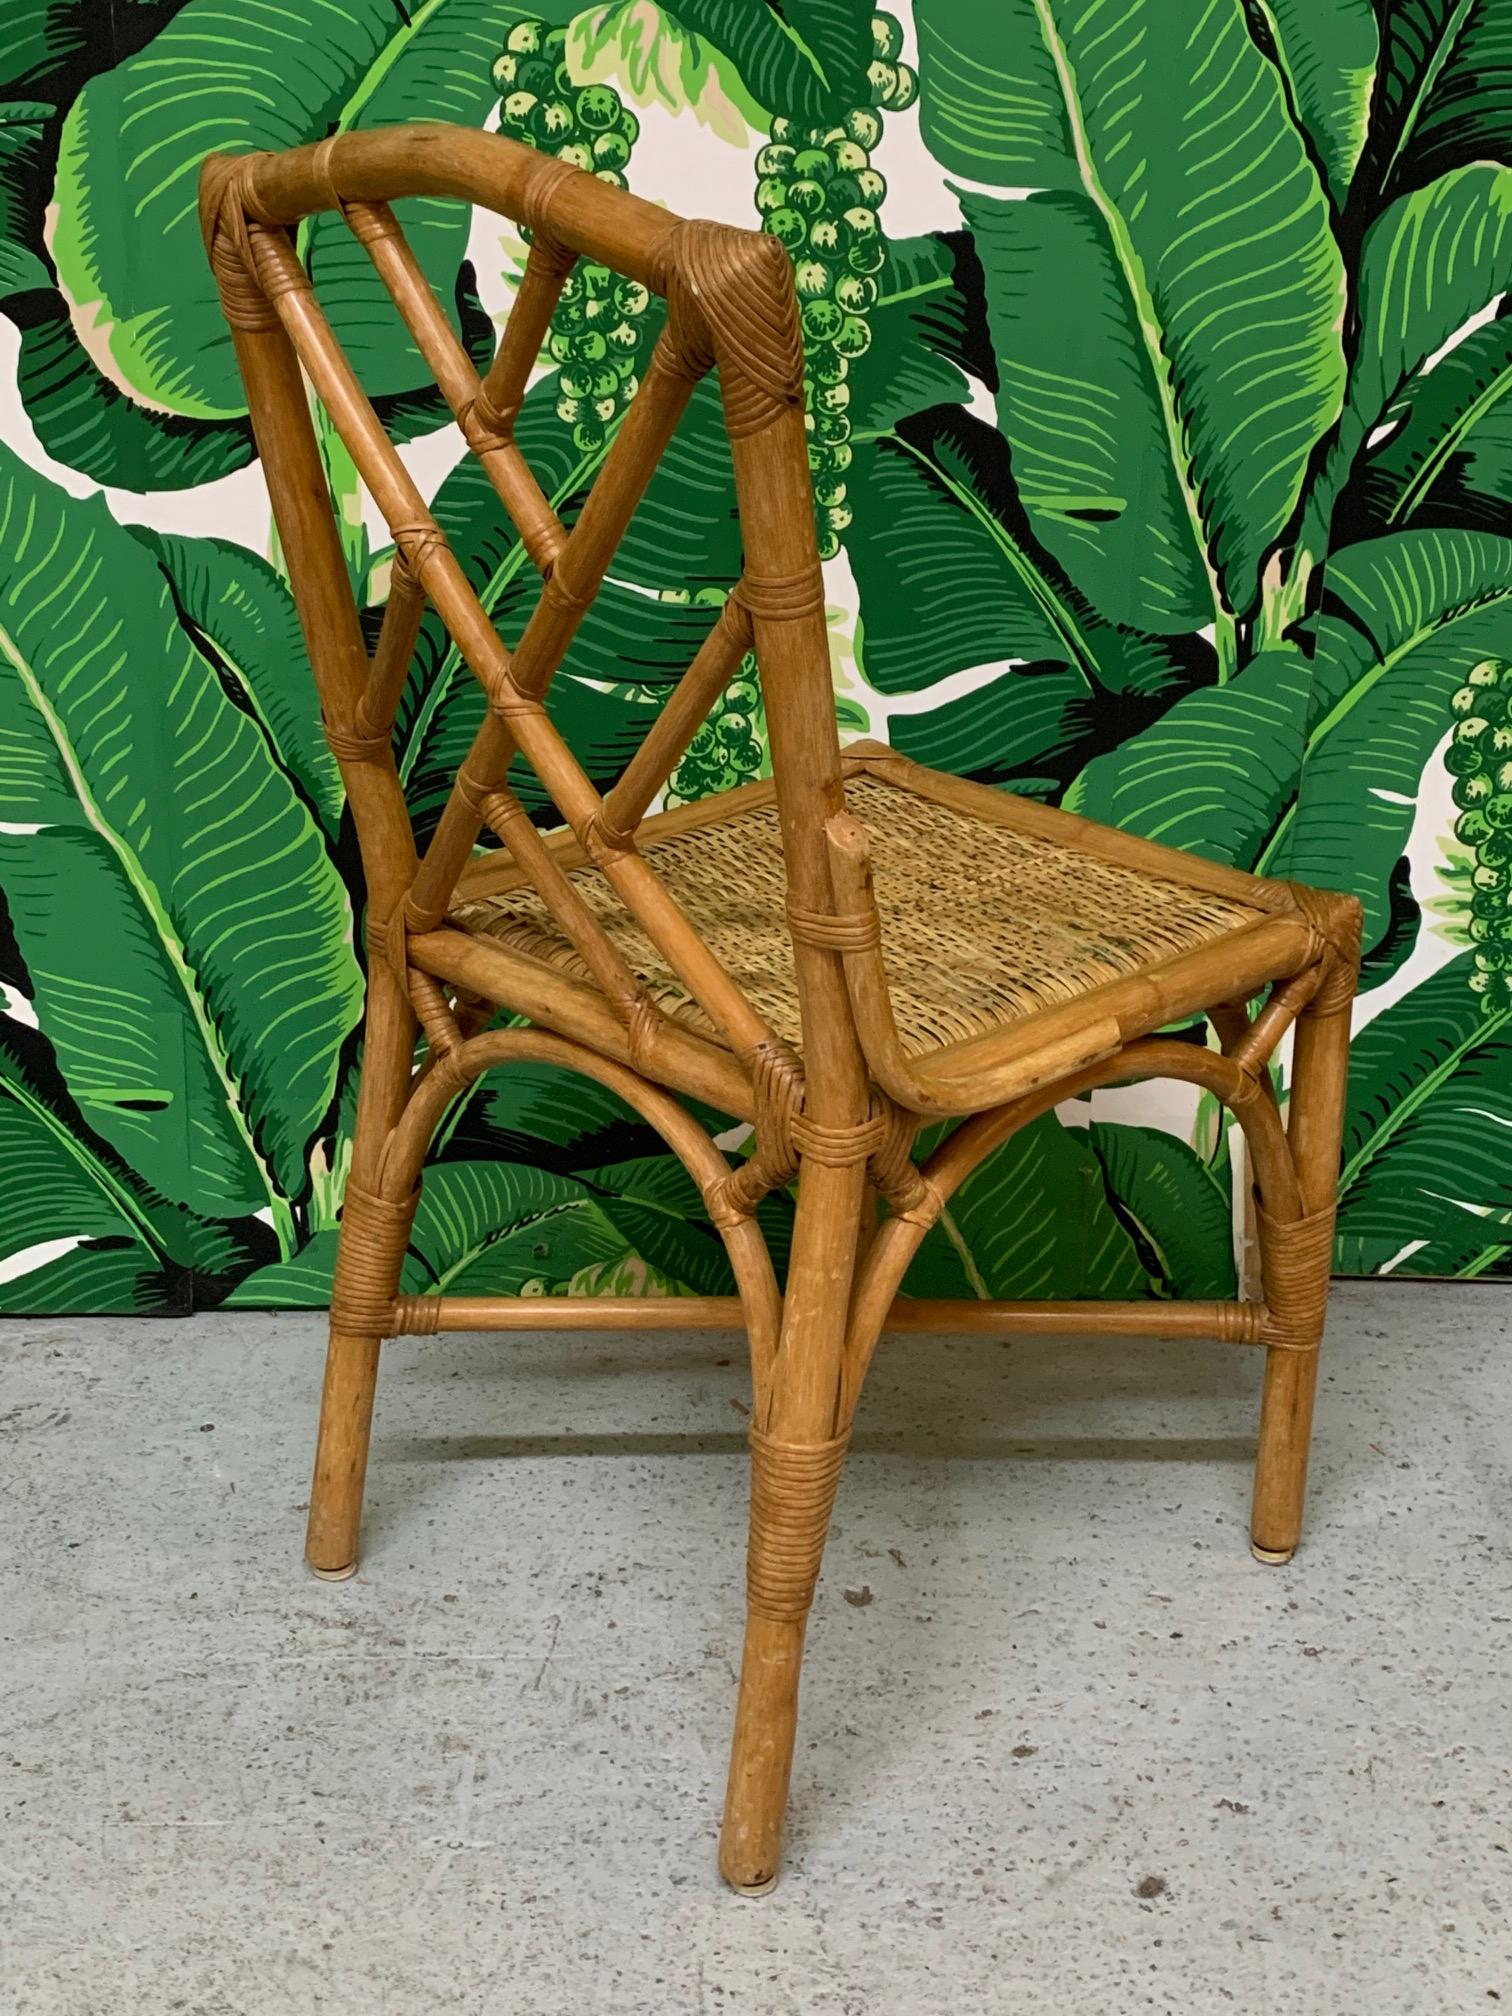 Set of six rattan dining chairs in Asian chinoiserie style. Iconic Chinese chippendale pattern in back, and woven rattan seats. Good vintage condition with minor imperfections consistent with age. 
**Please note: We offer shipping direct from our